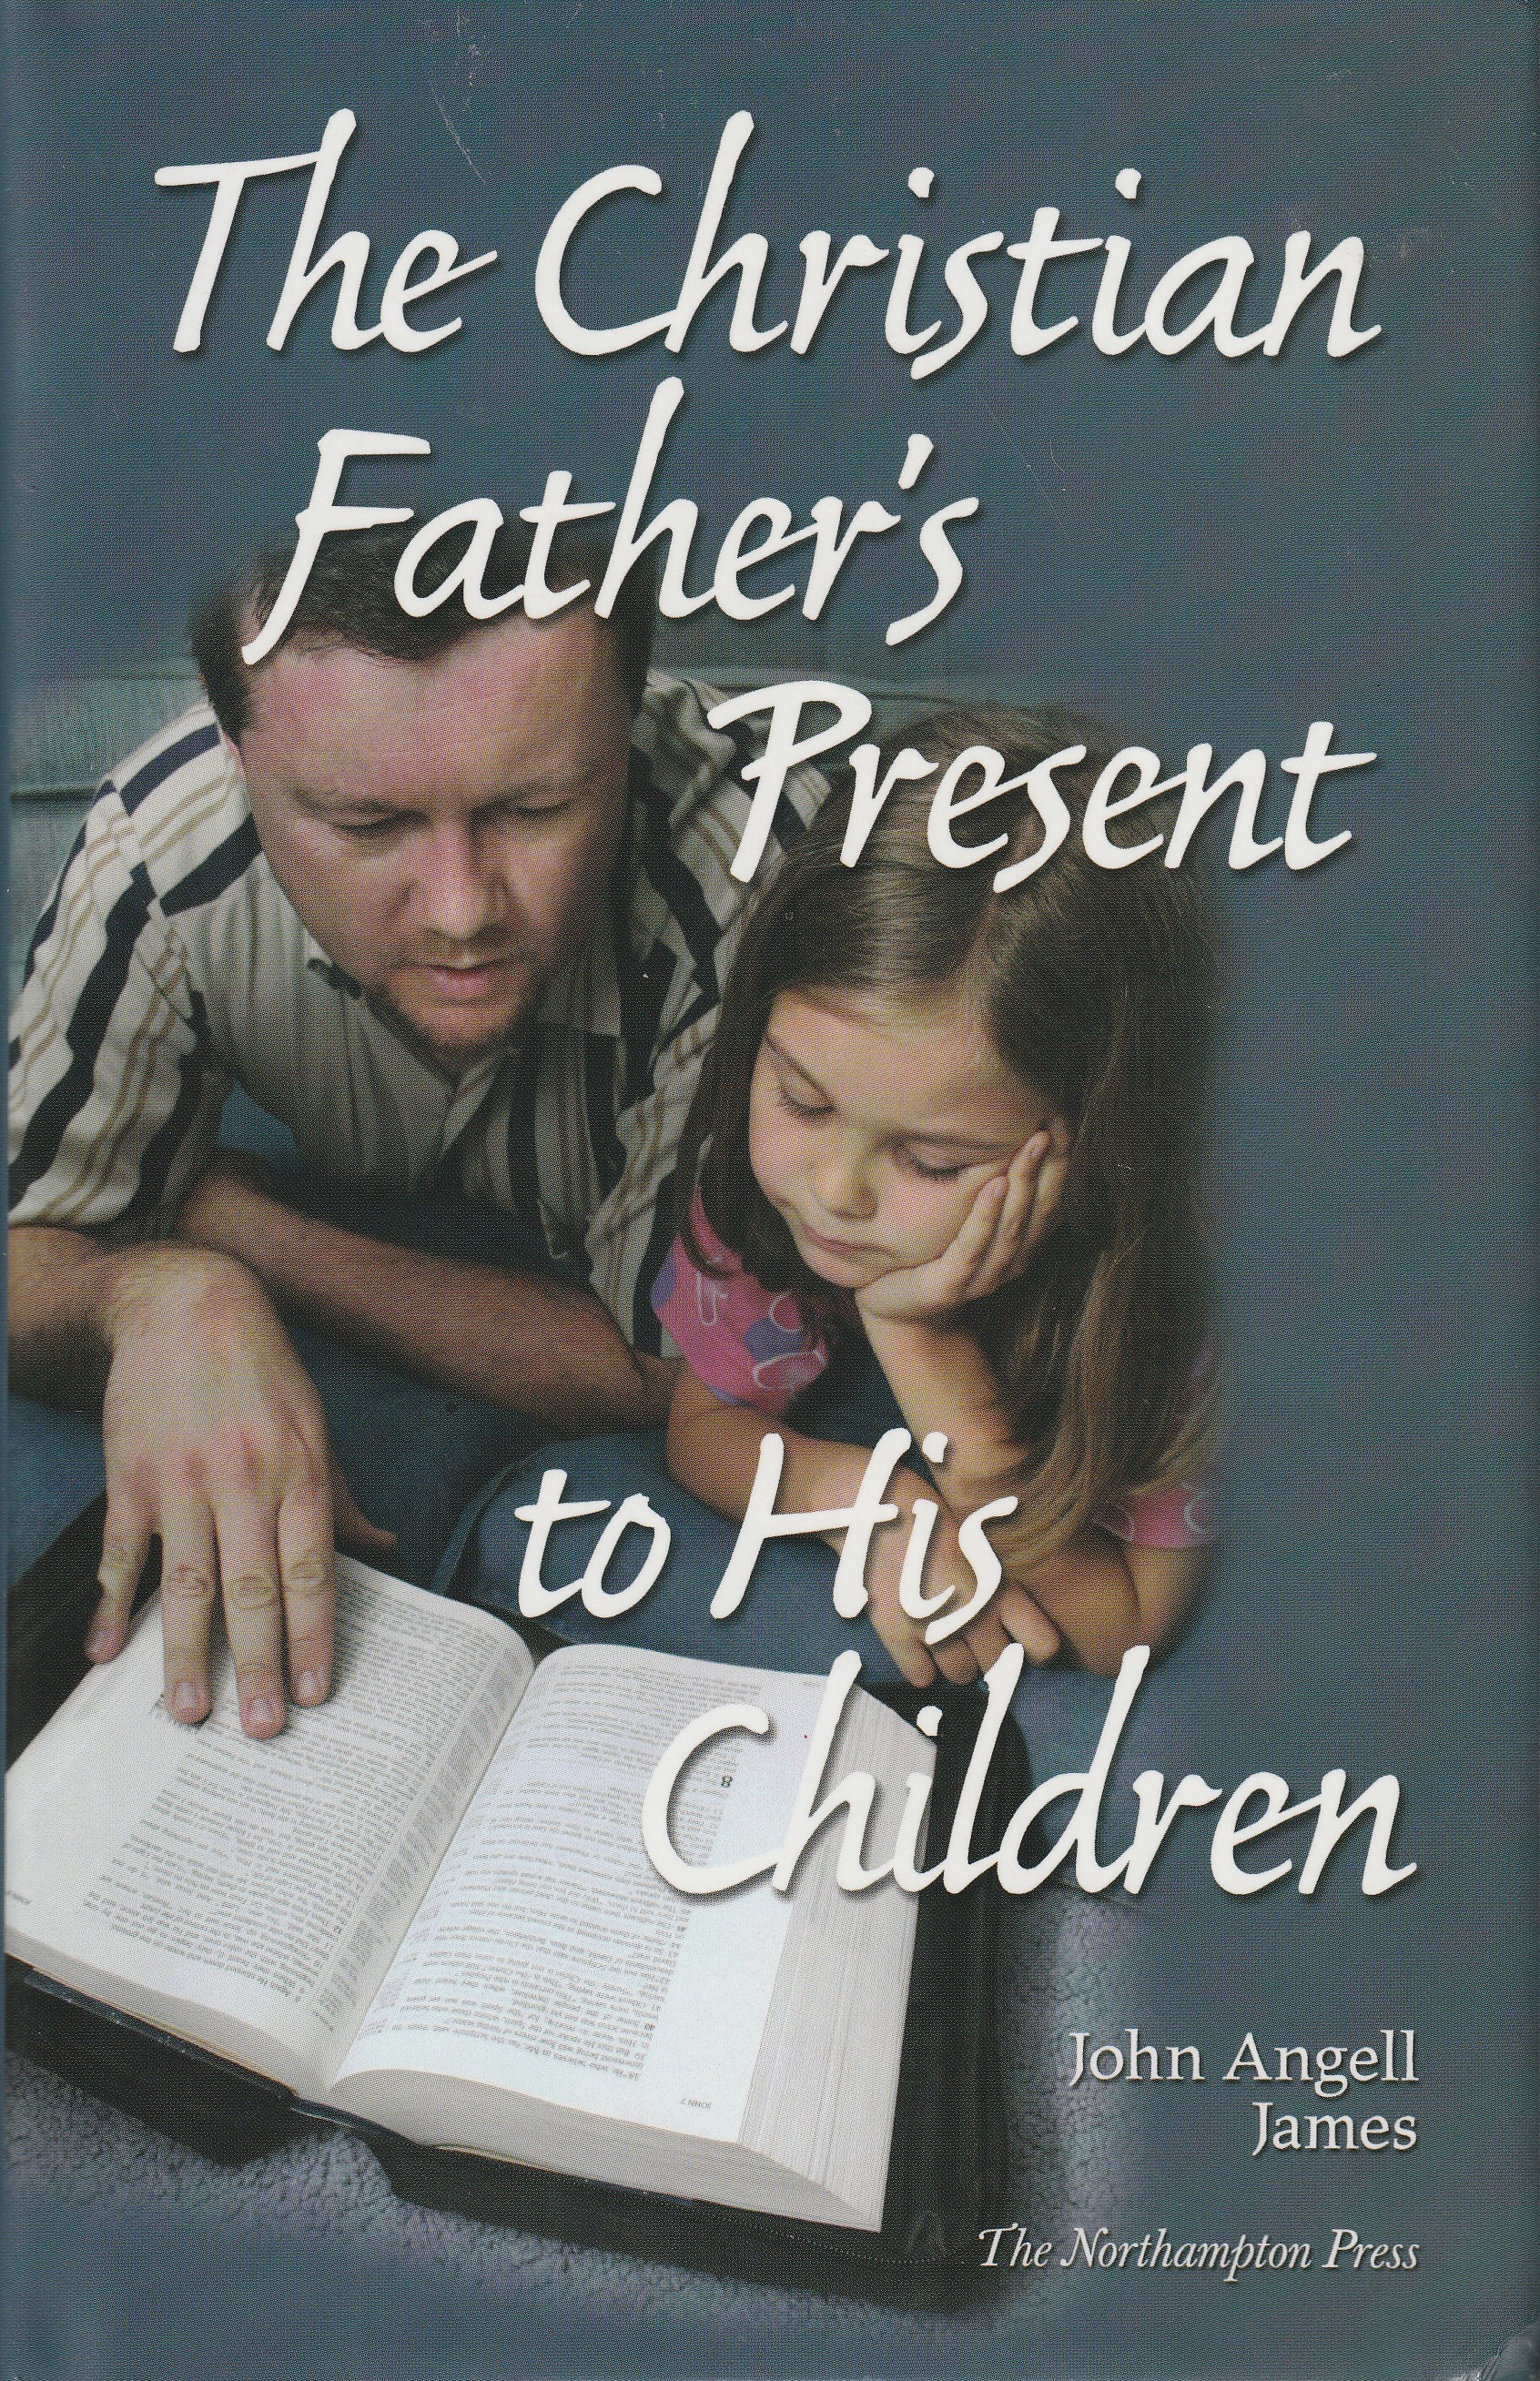 The Christian Father's Present to His Children